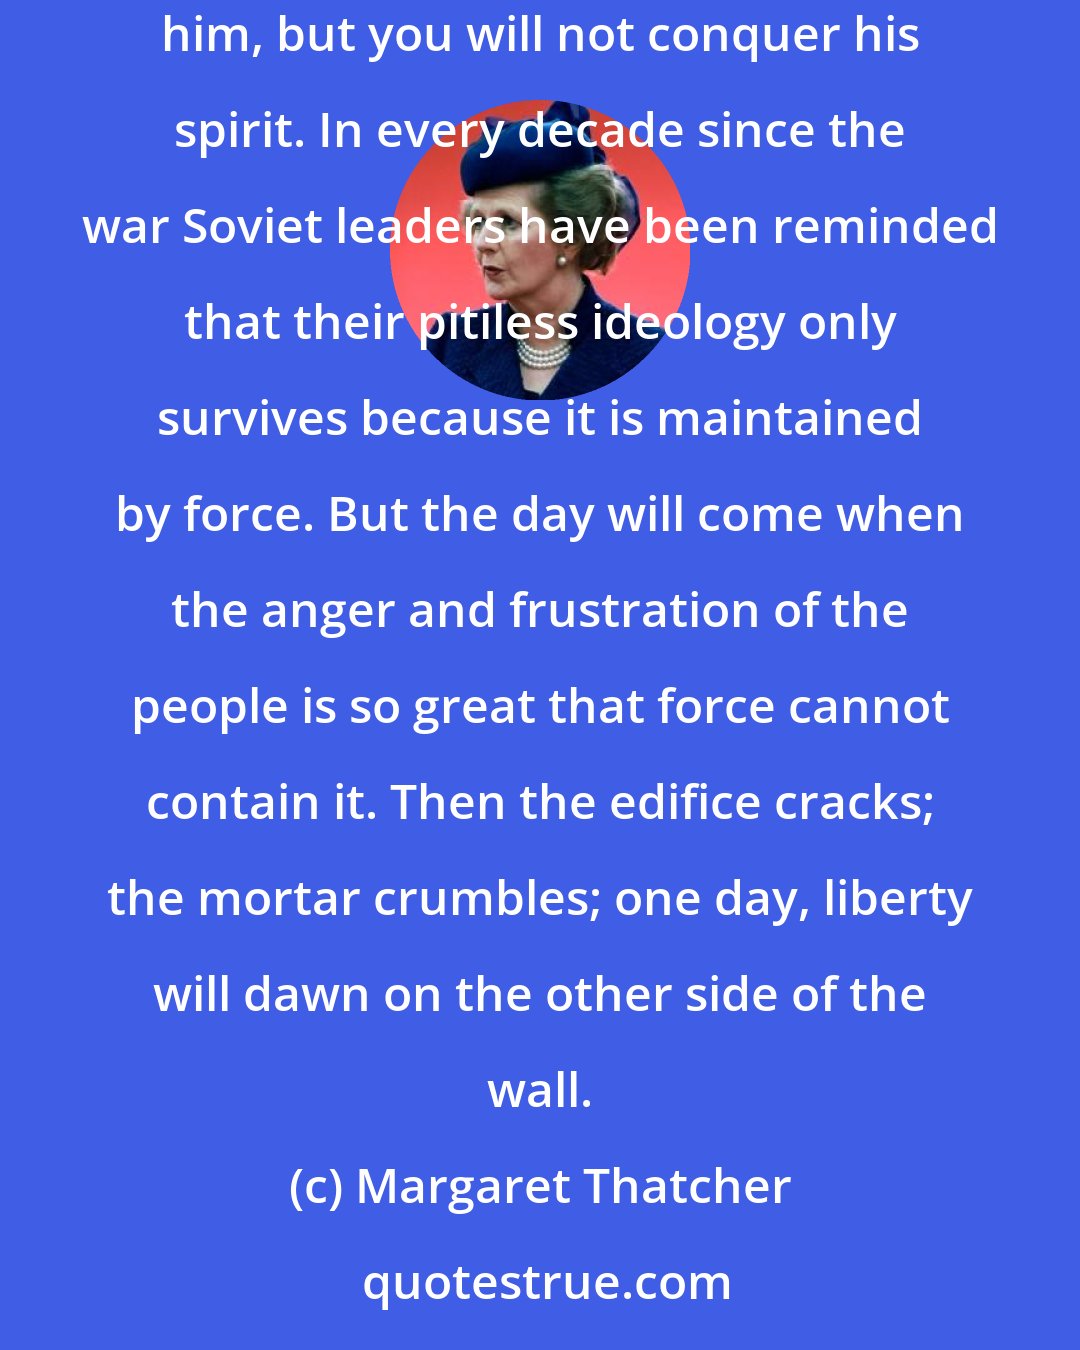 Margaret Thatcher: There are forces more powerful and pervasive than the apparatus of war. You may chain a man, but you cannot chain his mind. You may enslave him, but you will not conquer his spirit. In every decade since the war Soviet leaders have been reminded that their pitiless ideology only survives because it is maintained by force. But the day will come when the anger and frustration of the people is so great that force cannot contain it. Then the edifice cracks; the mortar crumbles; one day, liberty will dawn on the other side of the wall.